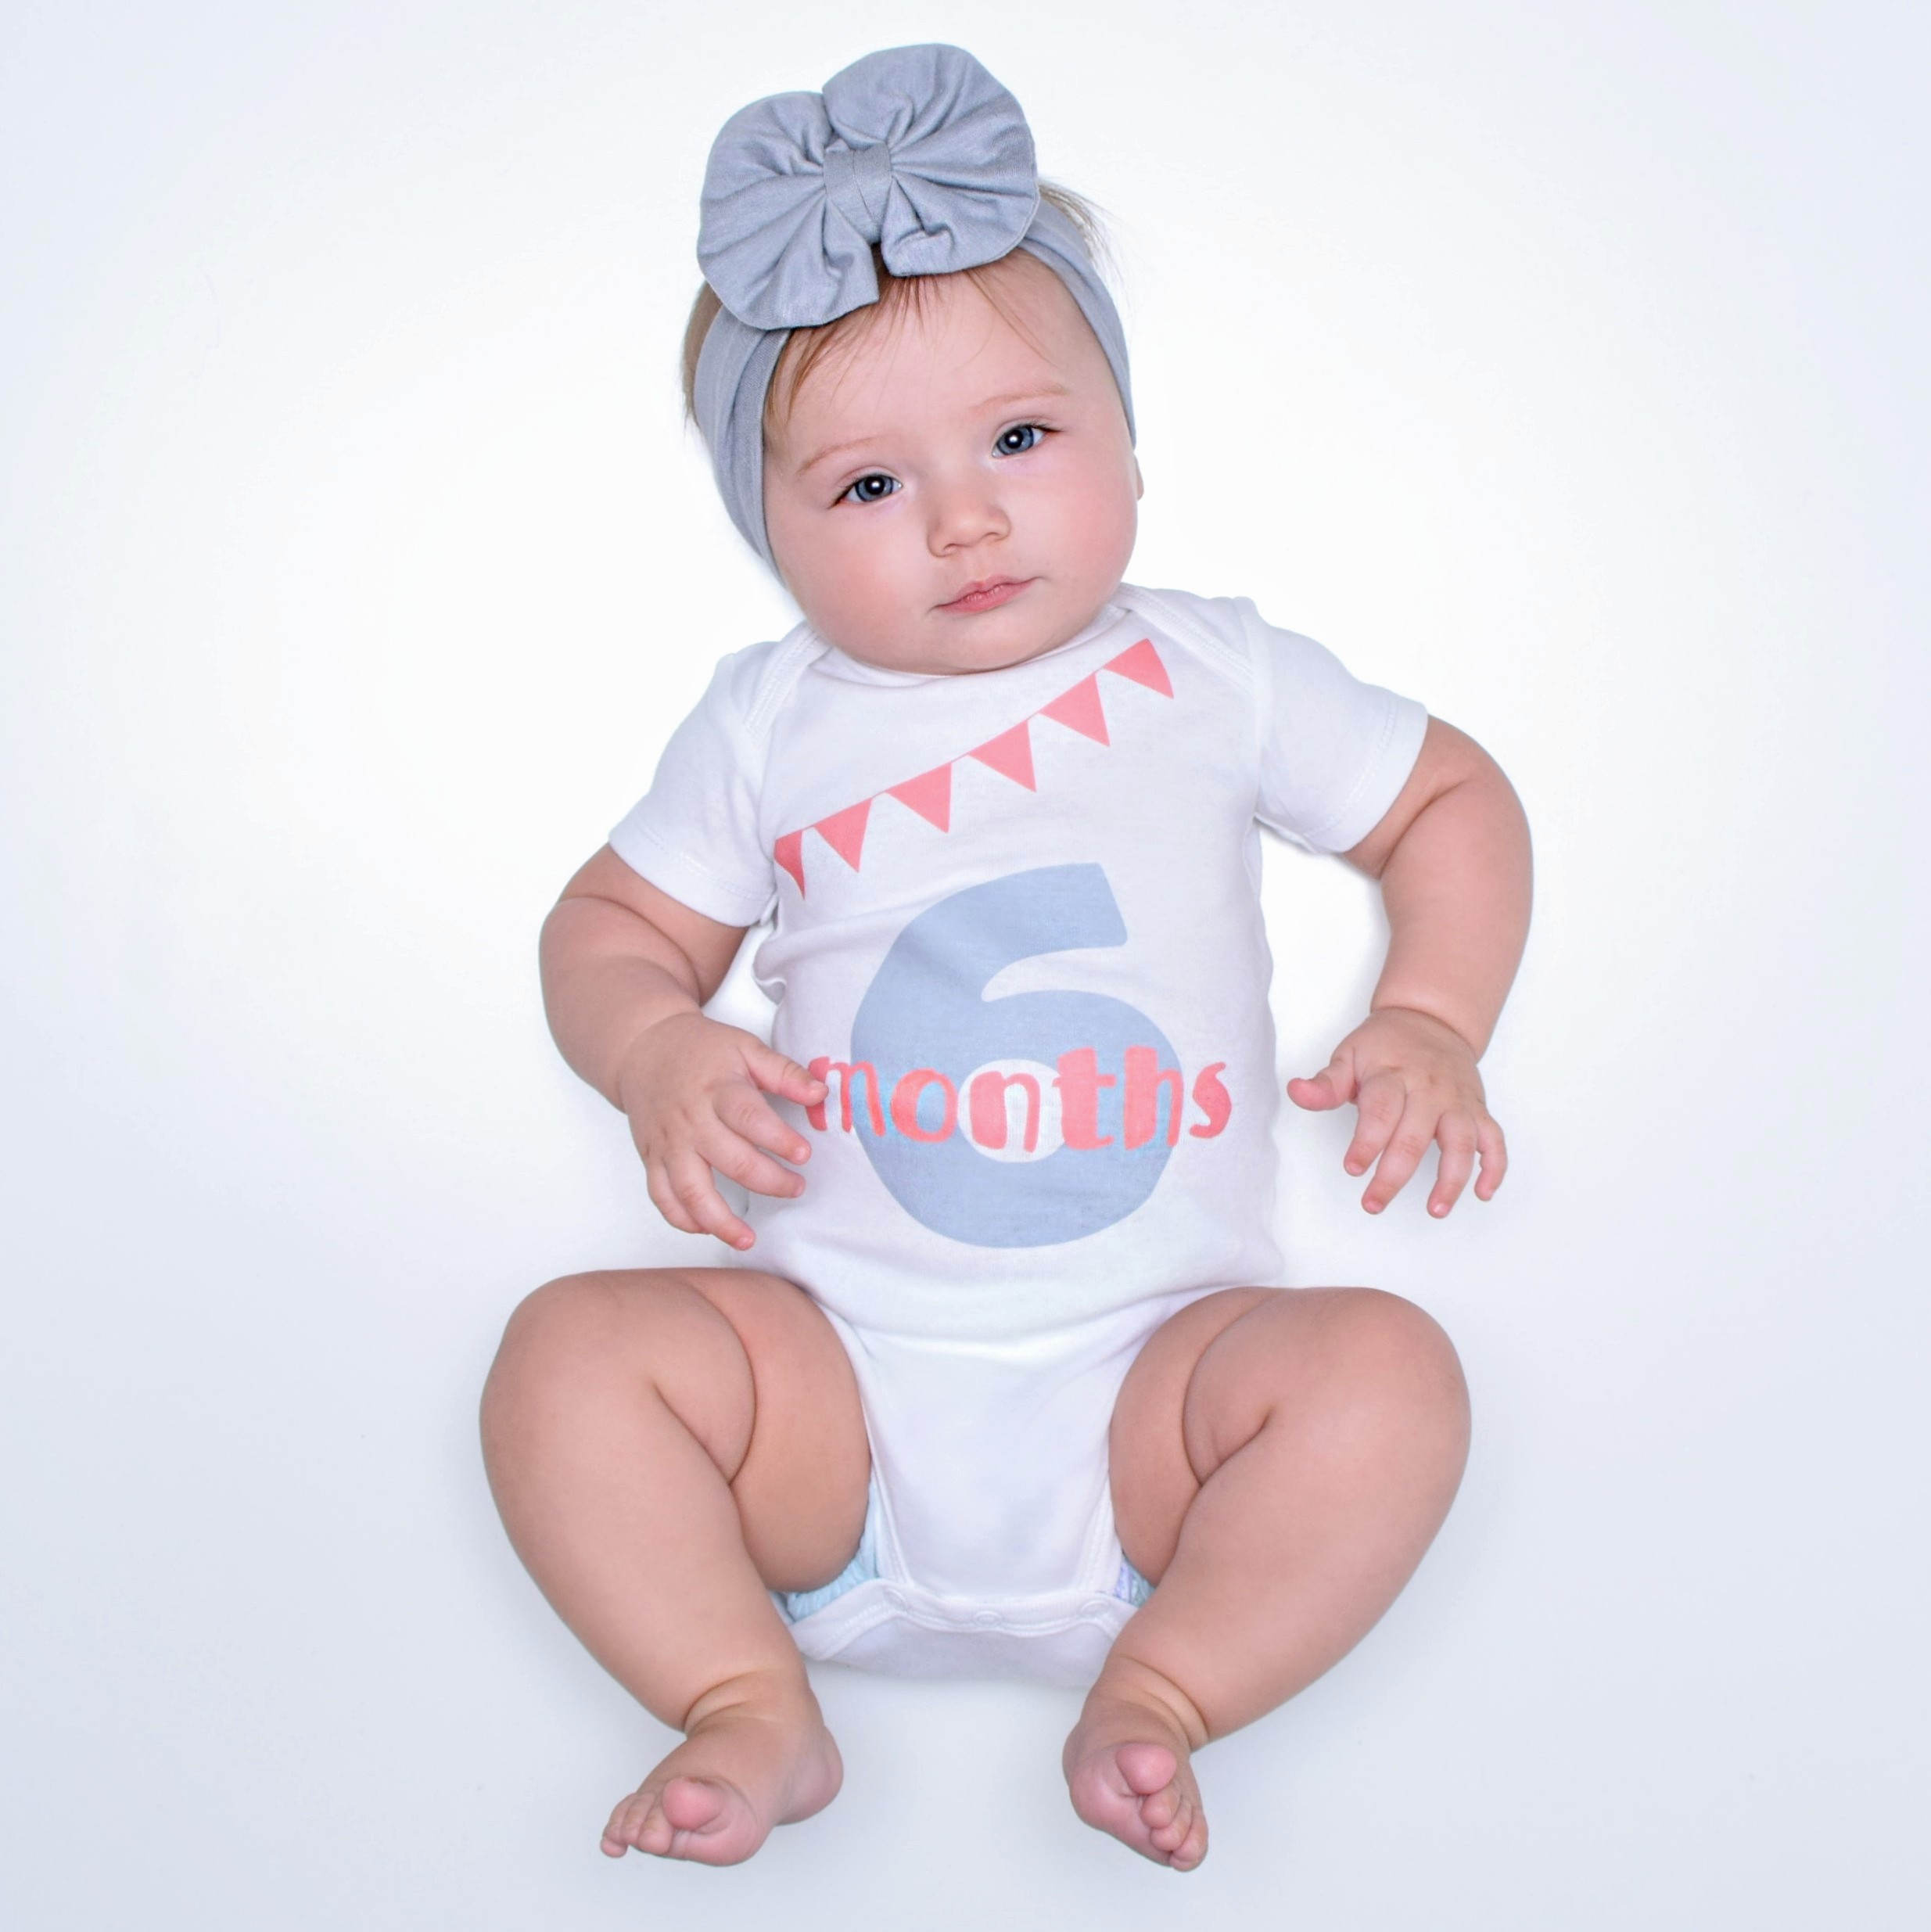 6 month baby outfit